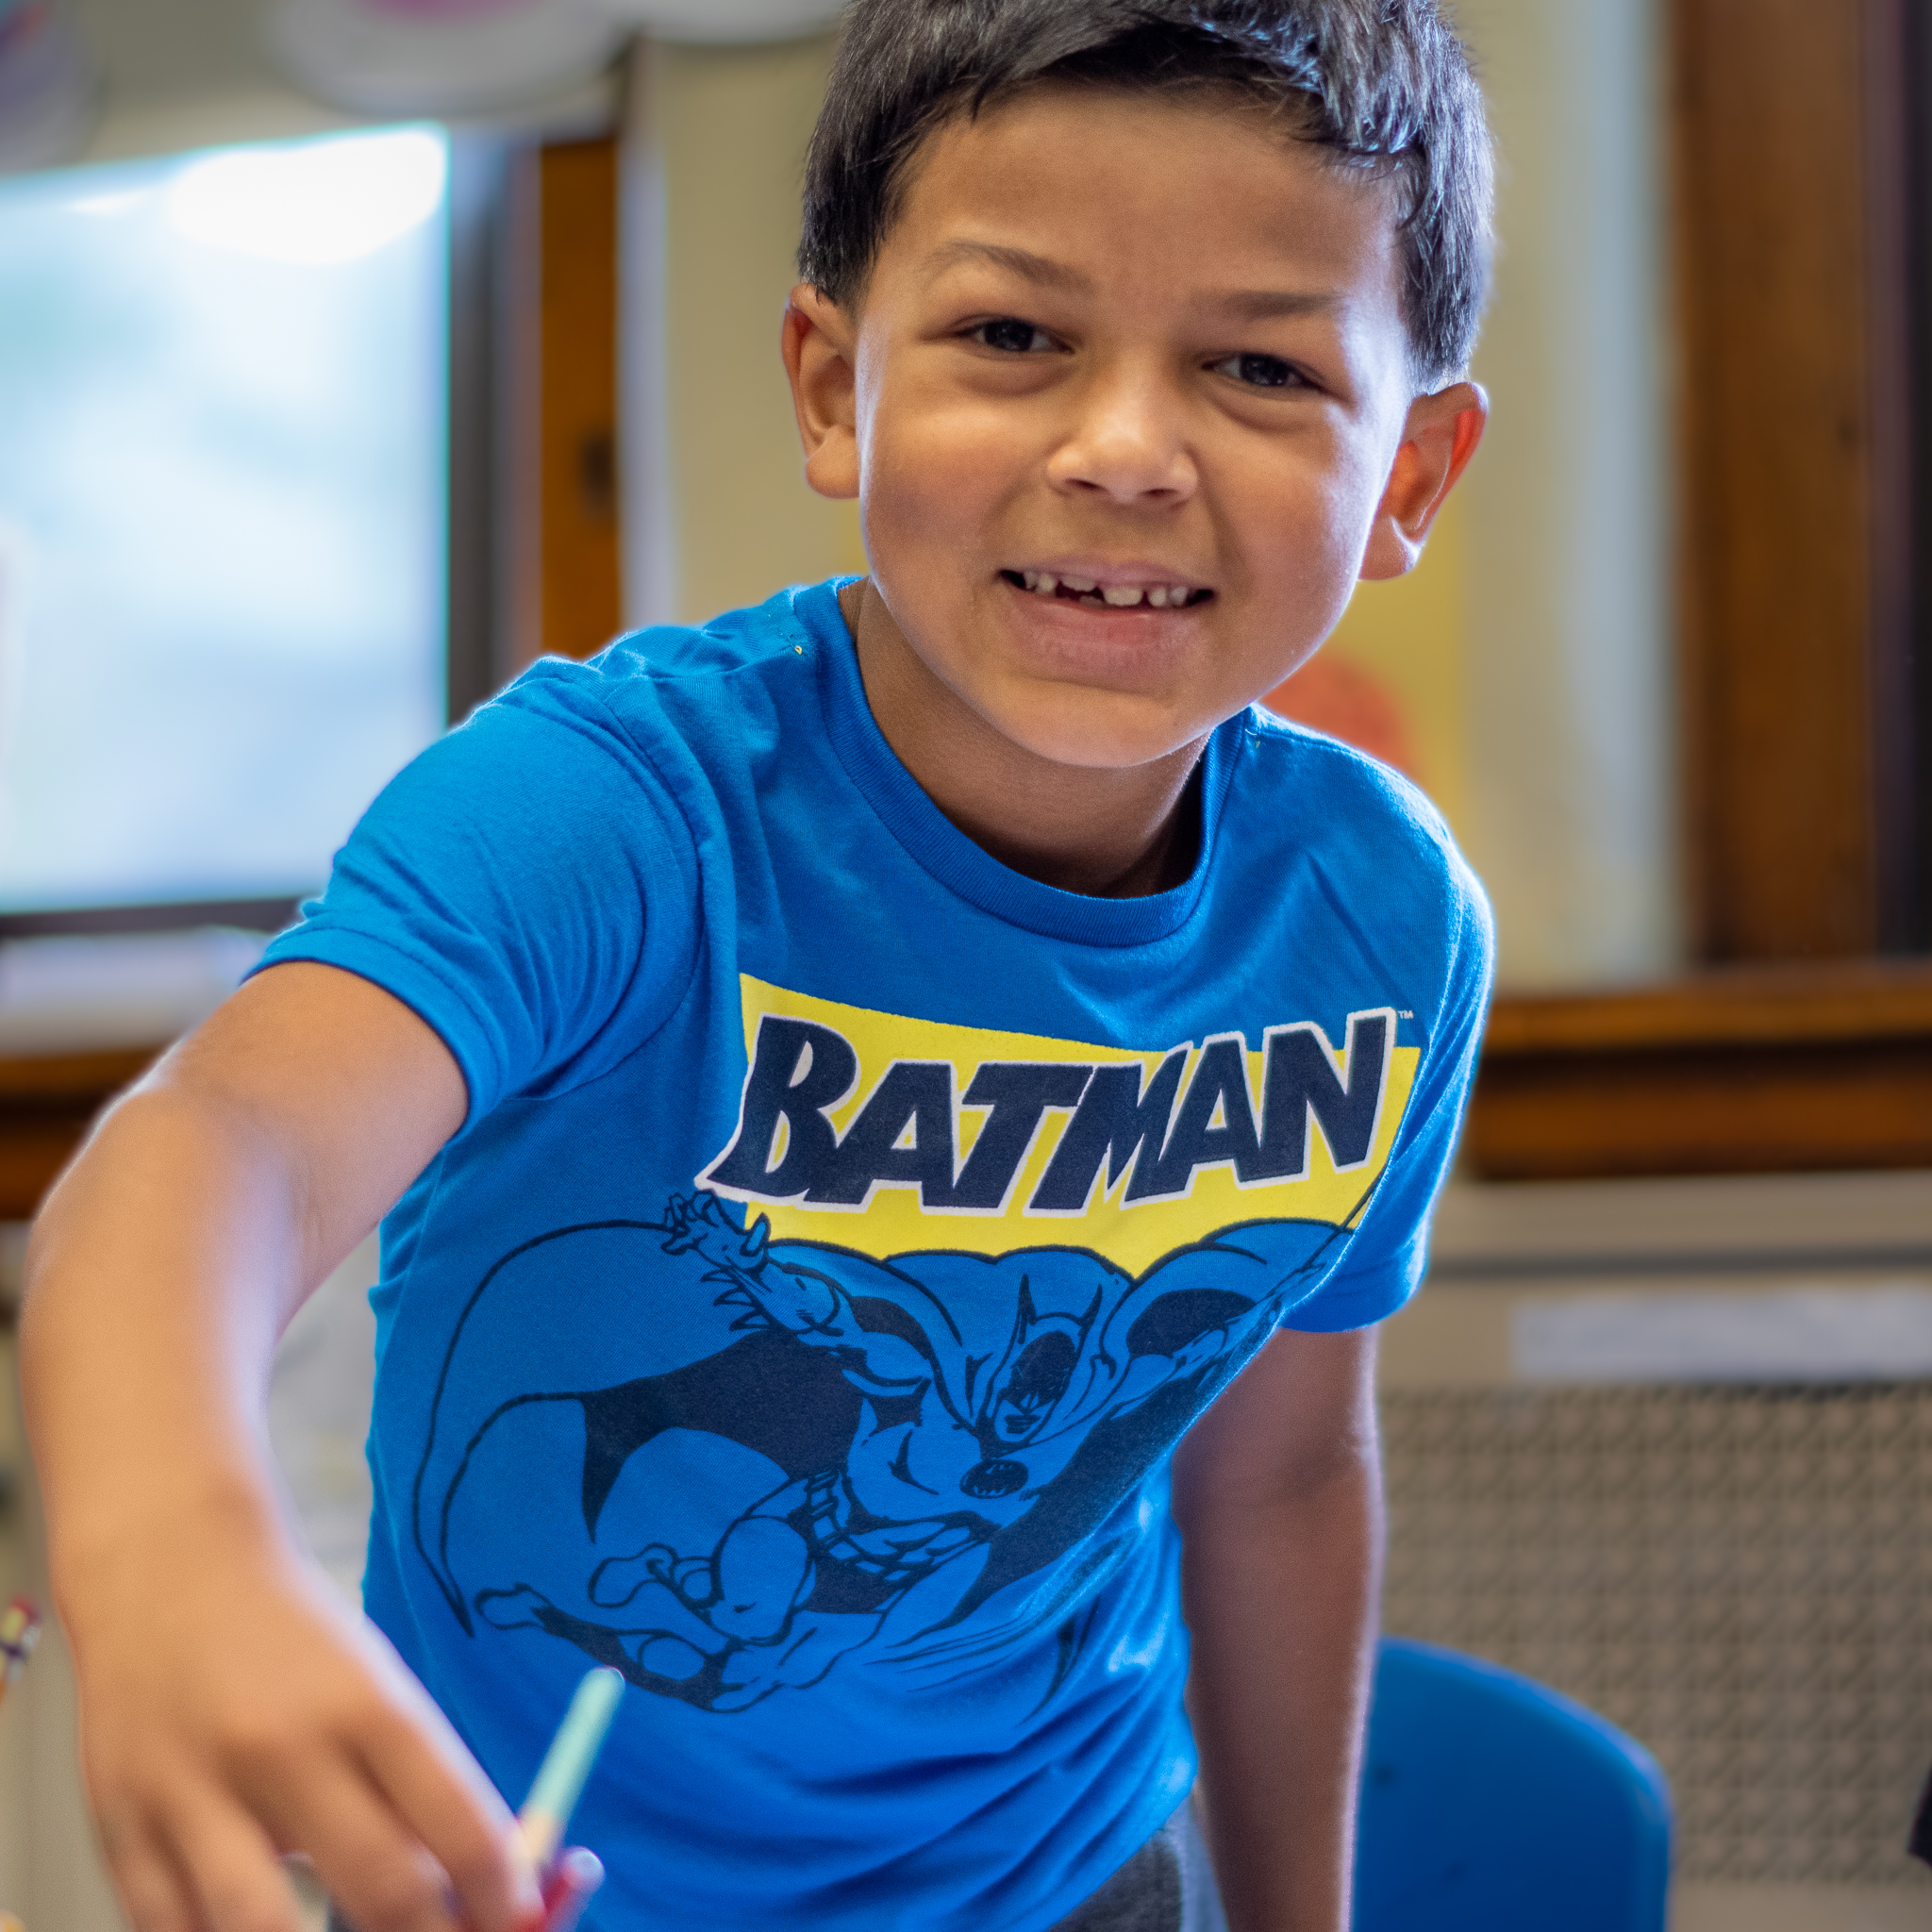 Student wearing a blue Batman shirt and holding a water color brush.